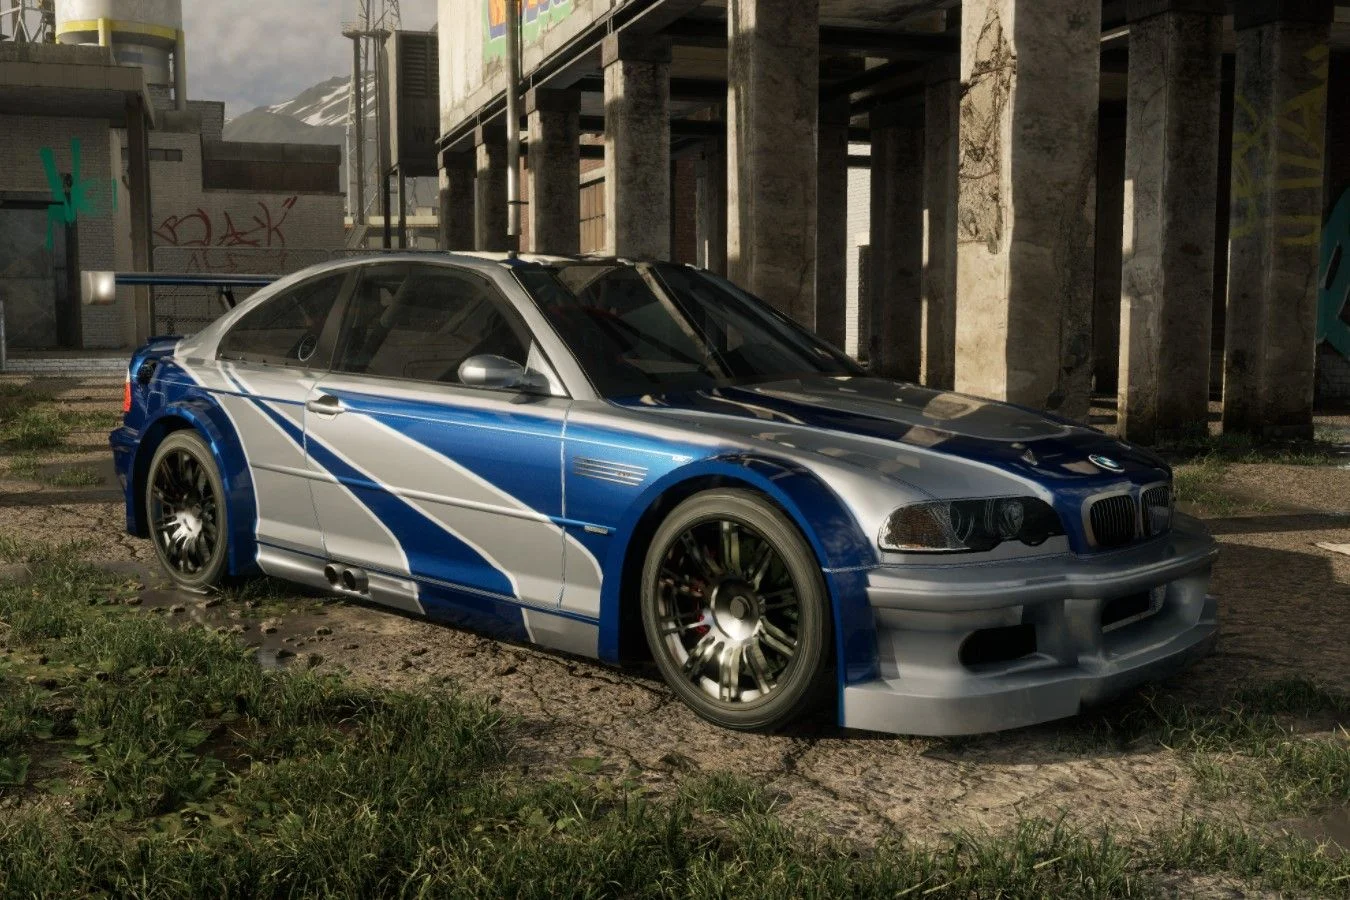 An enthusiast showed what NFS: Most Wanted could look like on the Unreal Engine 5